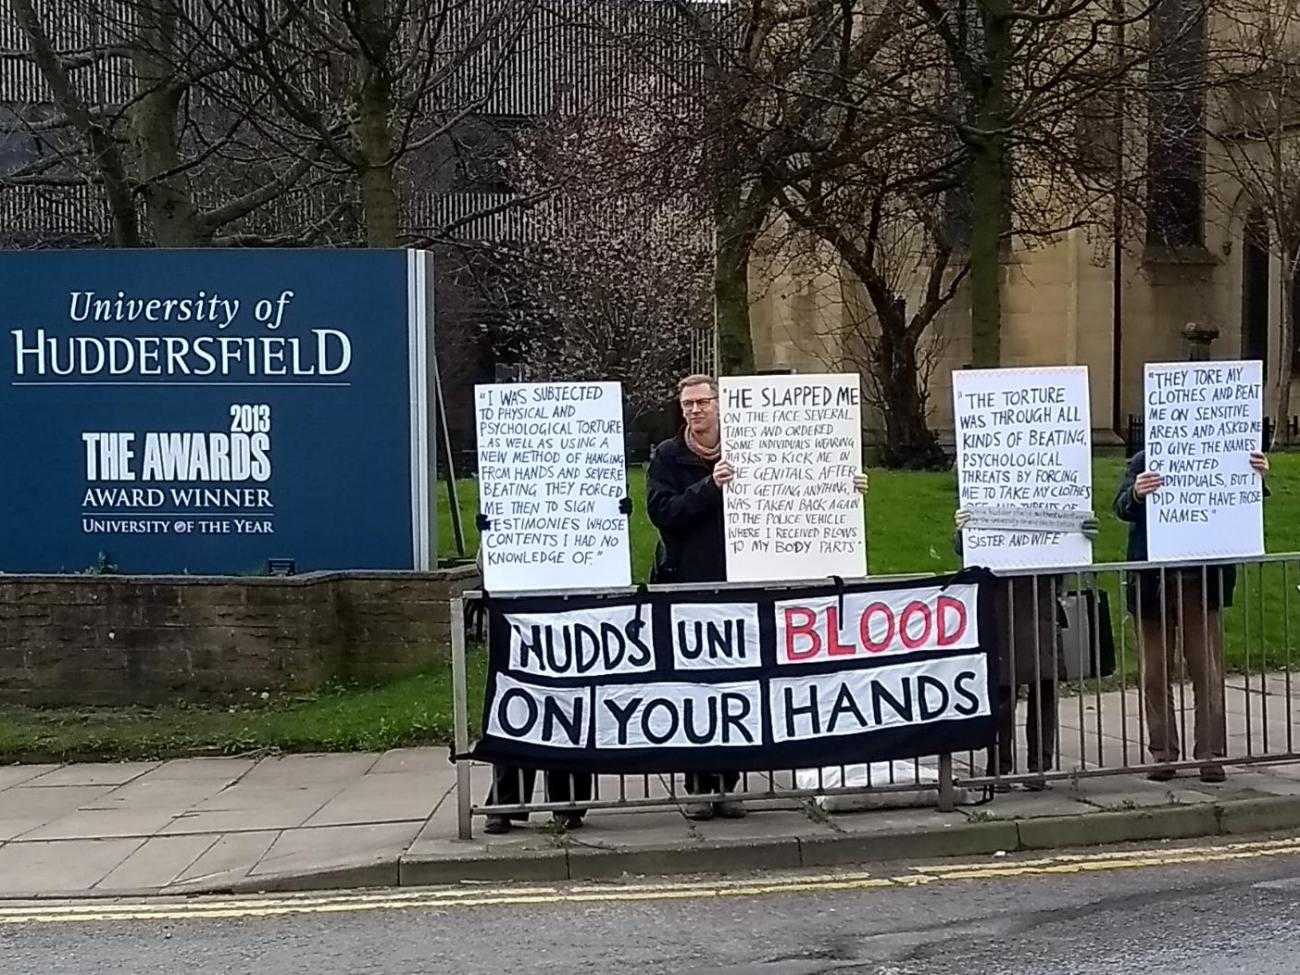 Four protesters hold signs outside the University of Huddersfield. The placards detail human rights abuses at the Bahrain Royal Academy